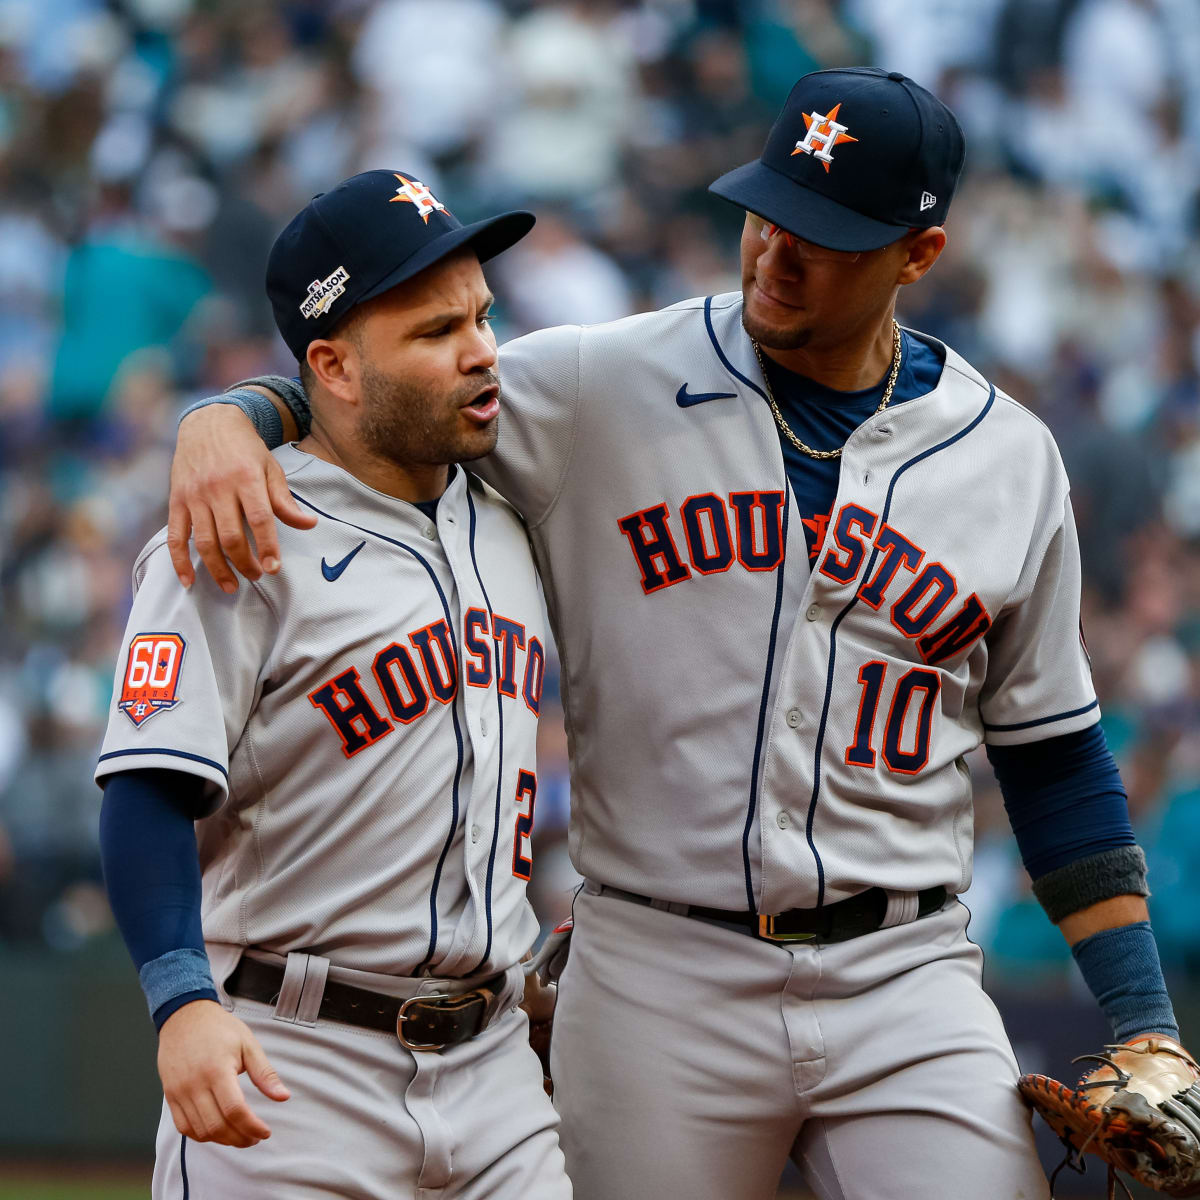 ALCS Yankees vs. Astros schedule, where to watch, how to buy tickets